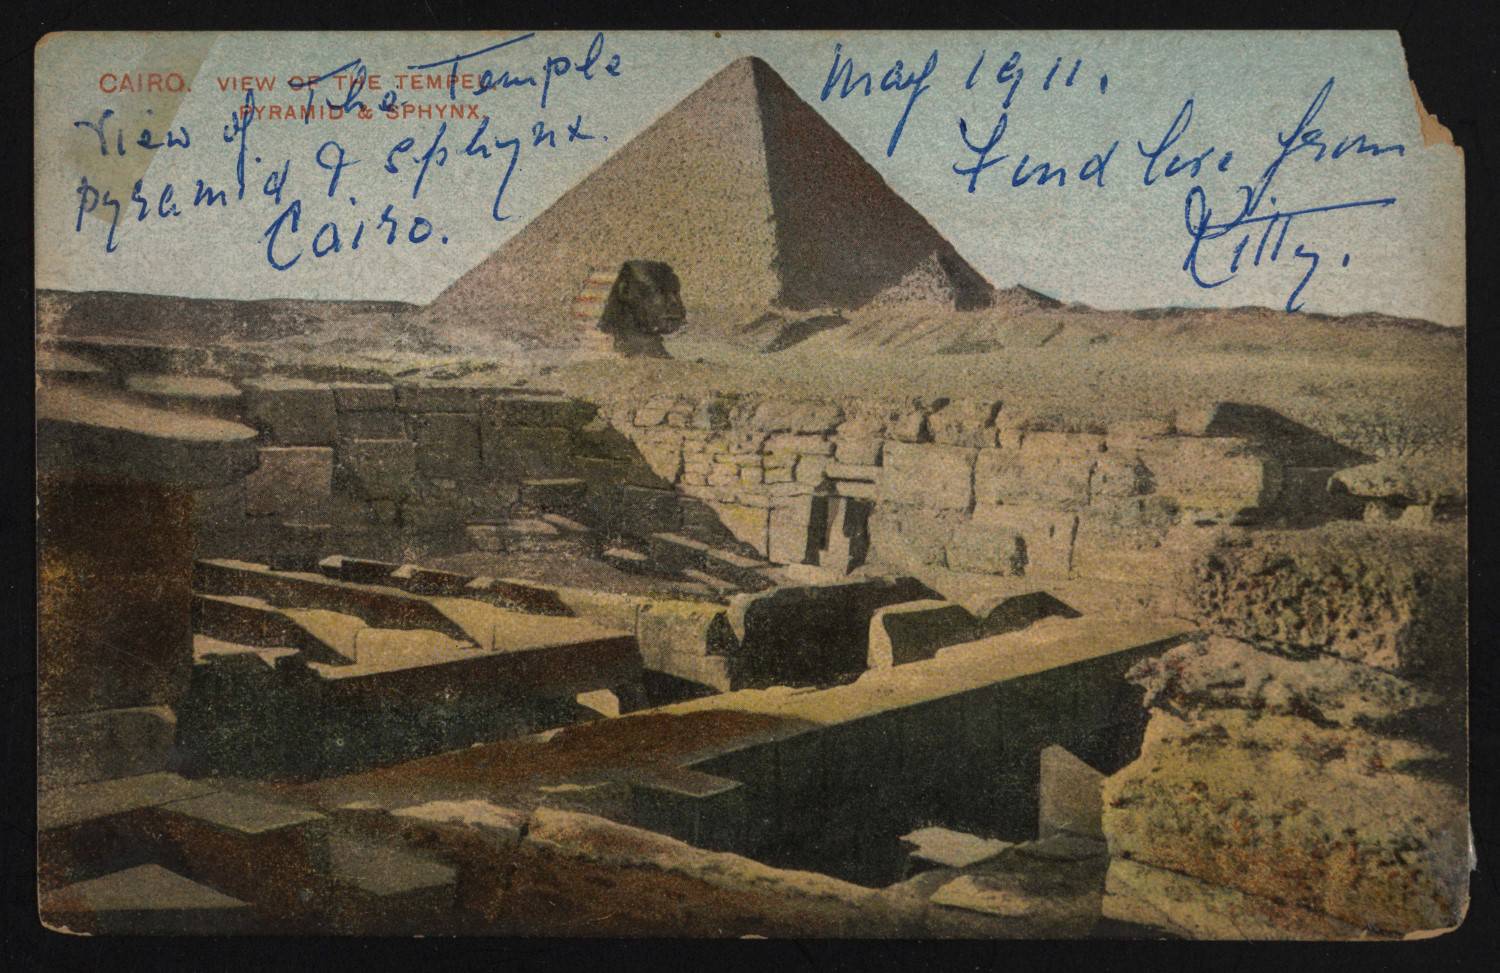 Postcard of Sphinx and Great Pyramid, Giza